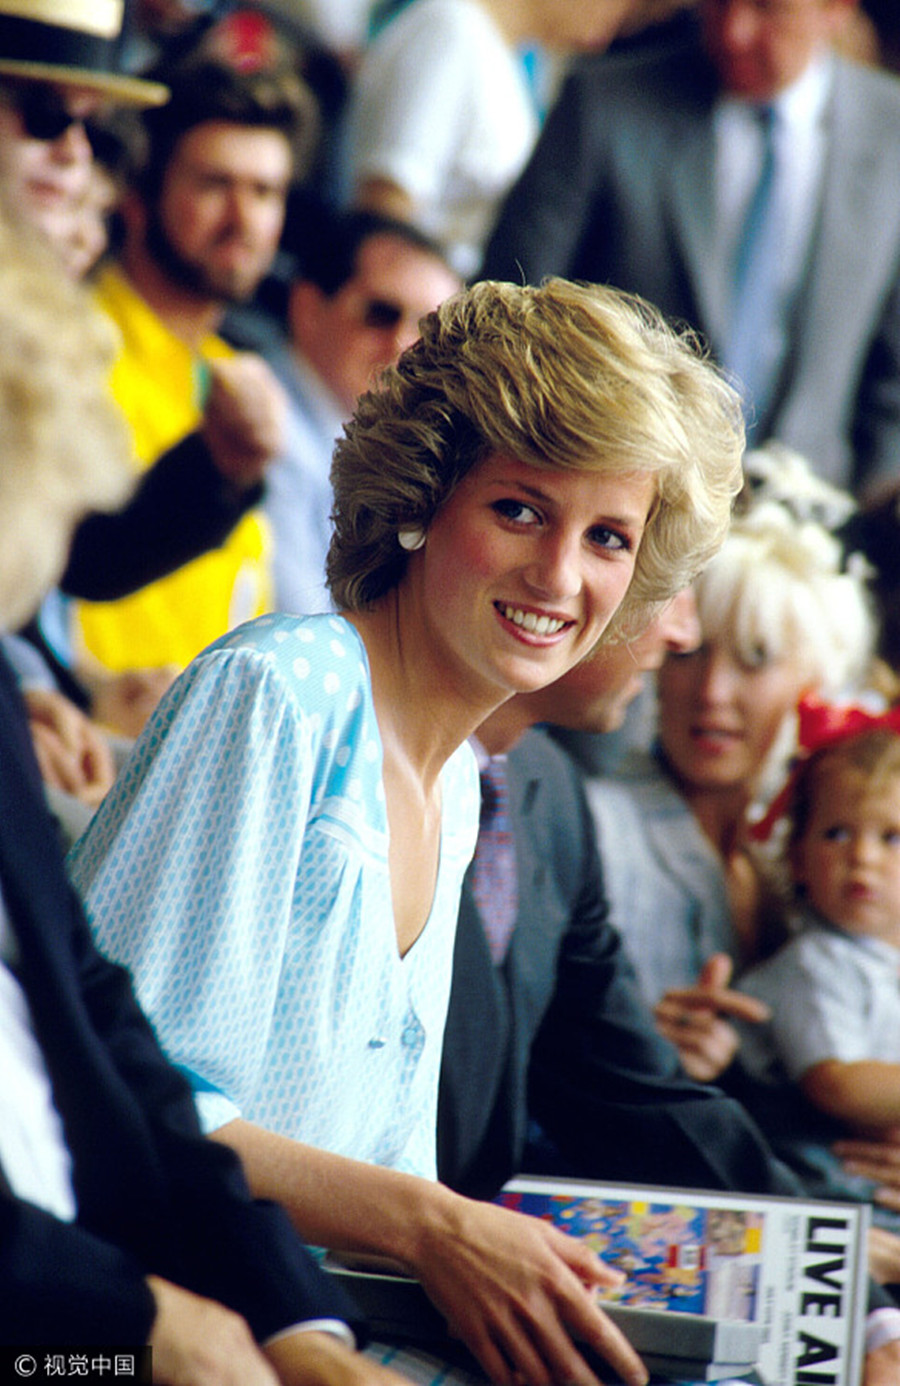 20 years on, Britain's Diana cult lives on